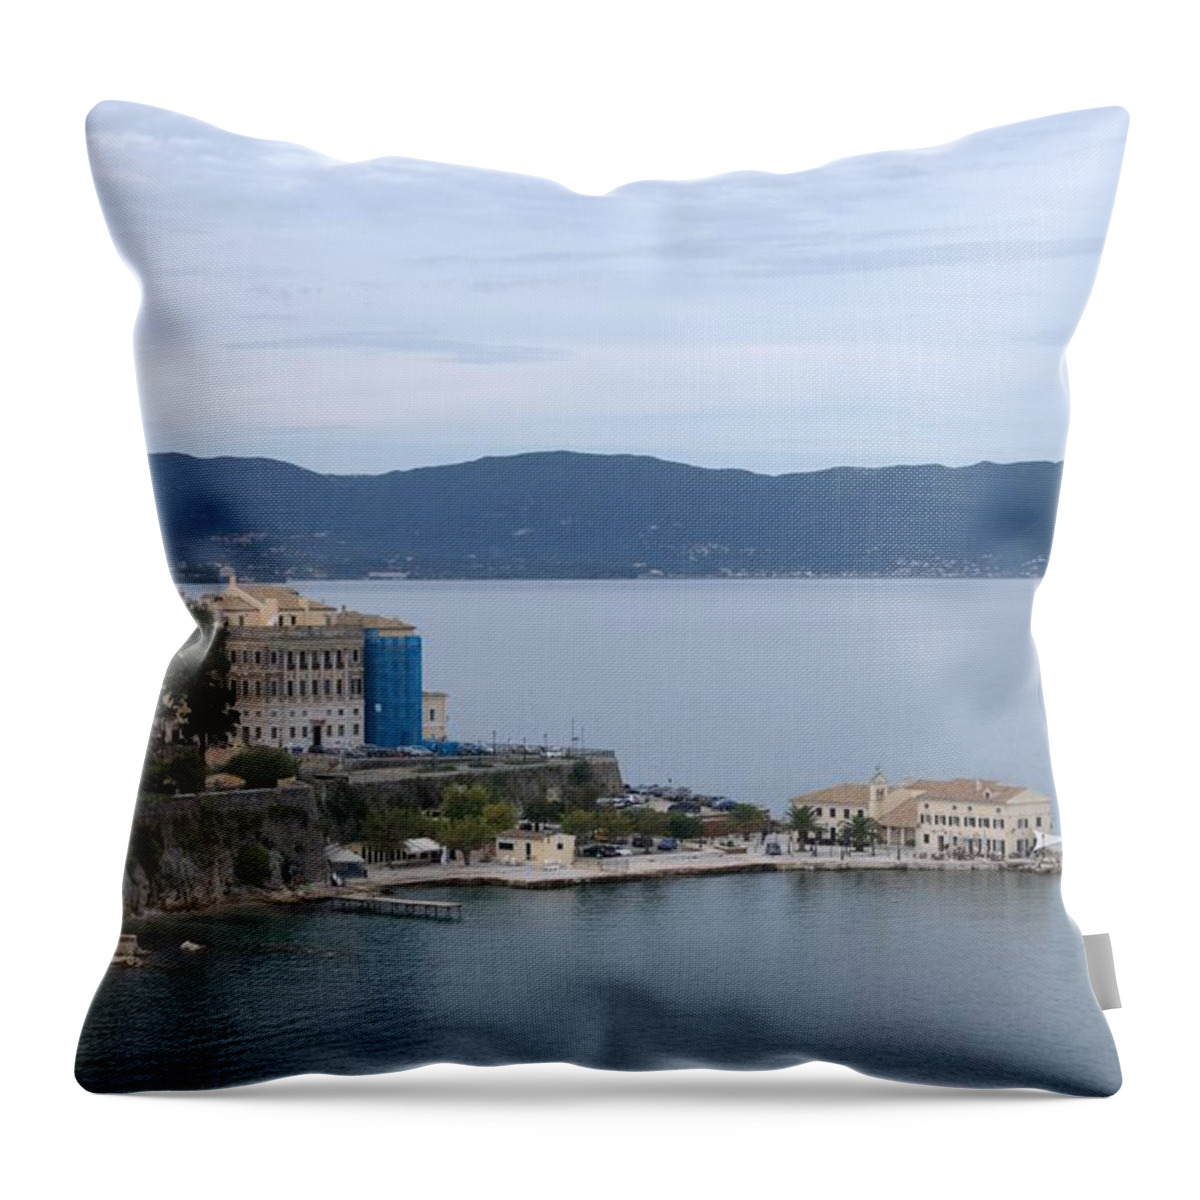 Corfu Throw Pillow featuring the photograph Corfu City 4 by George Katechis